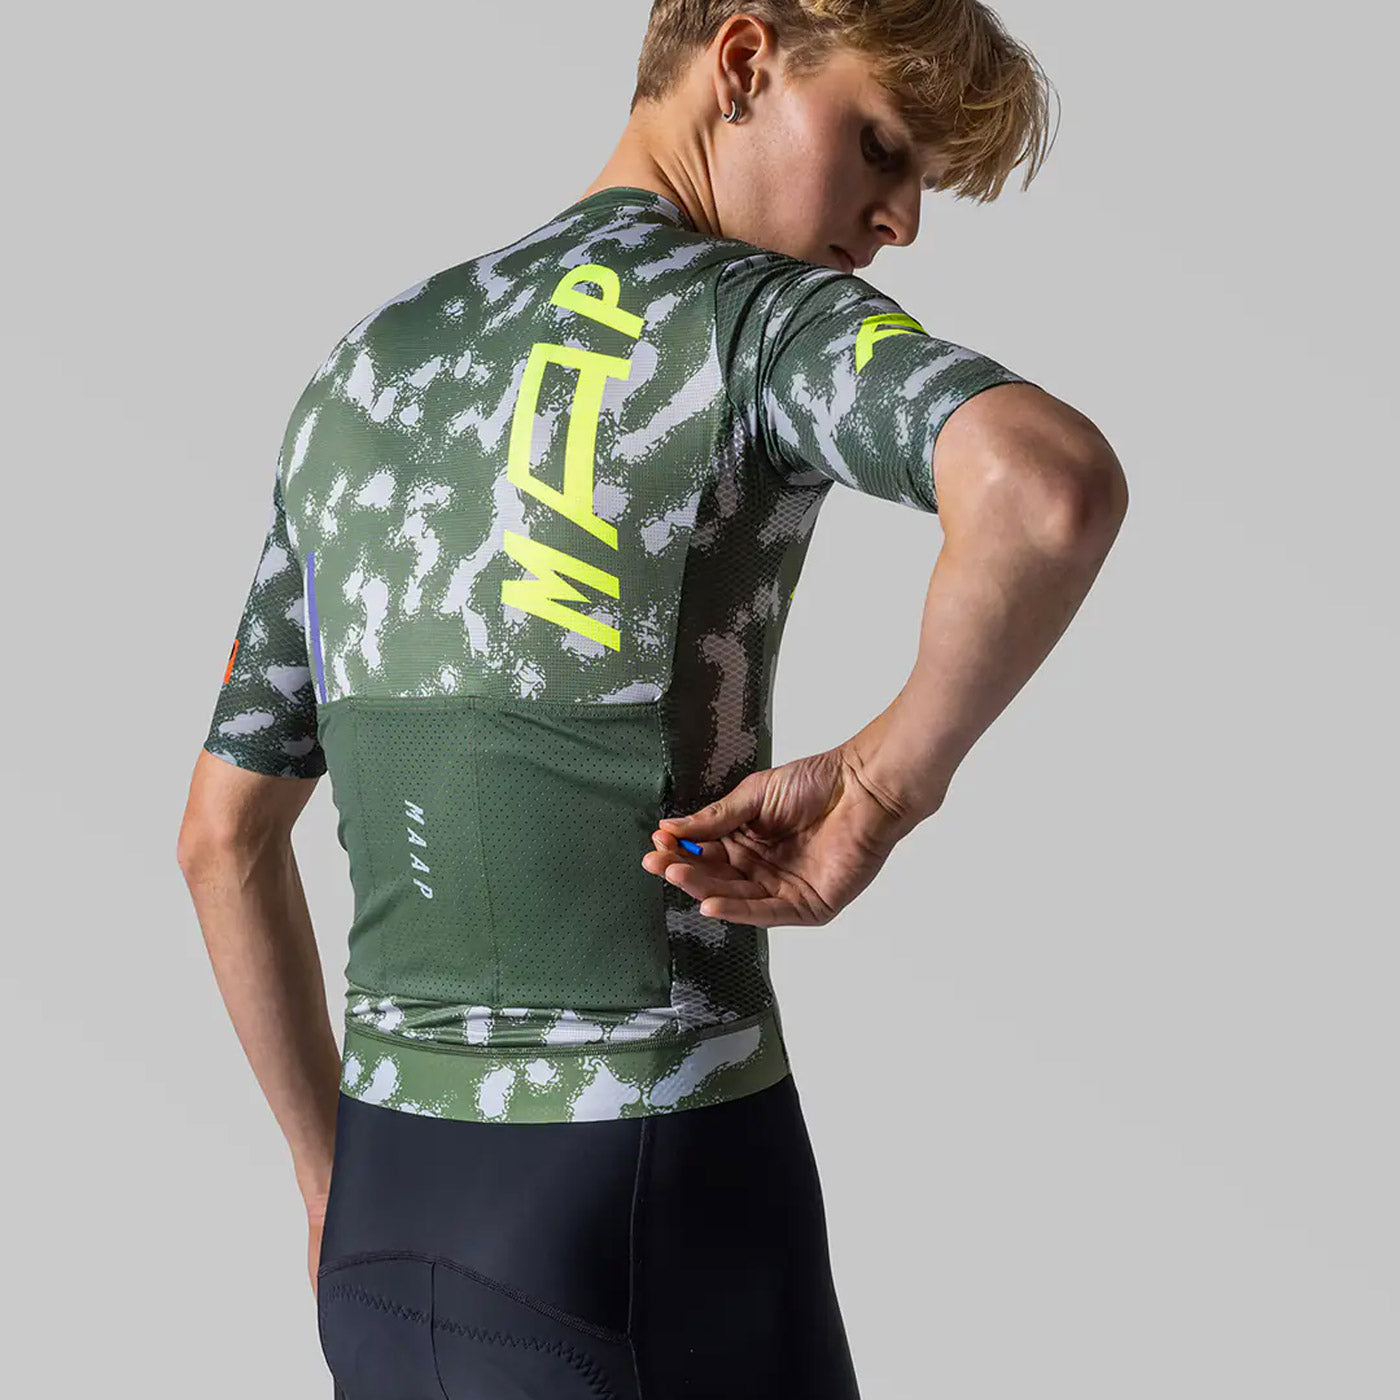 Maap Adapted I.S Pro Air jersey - Green | All4cycling